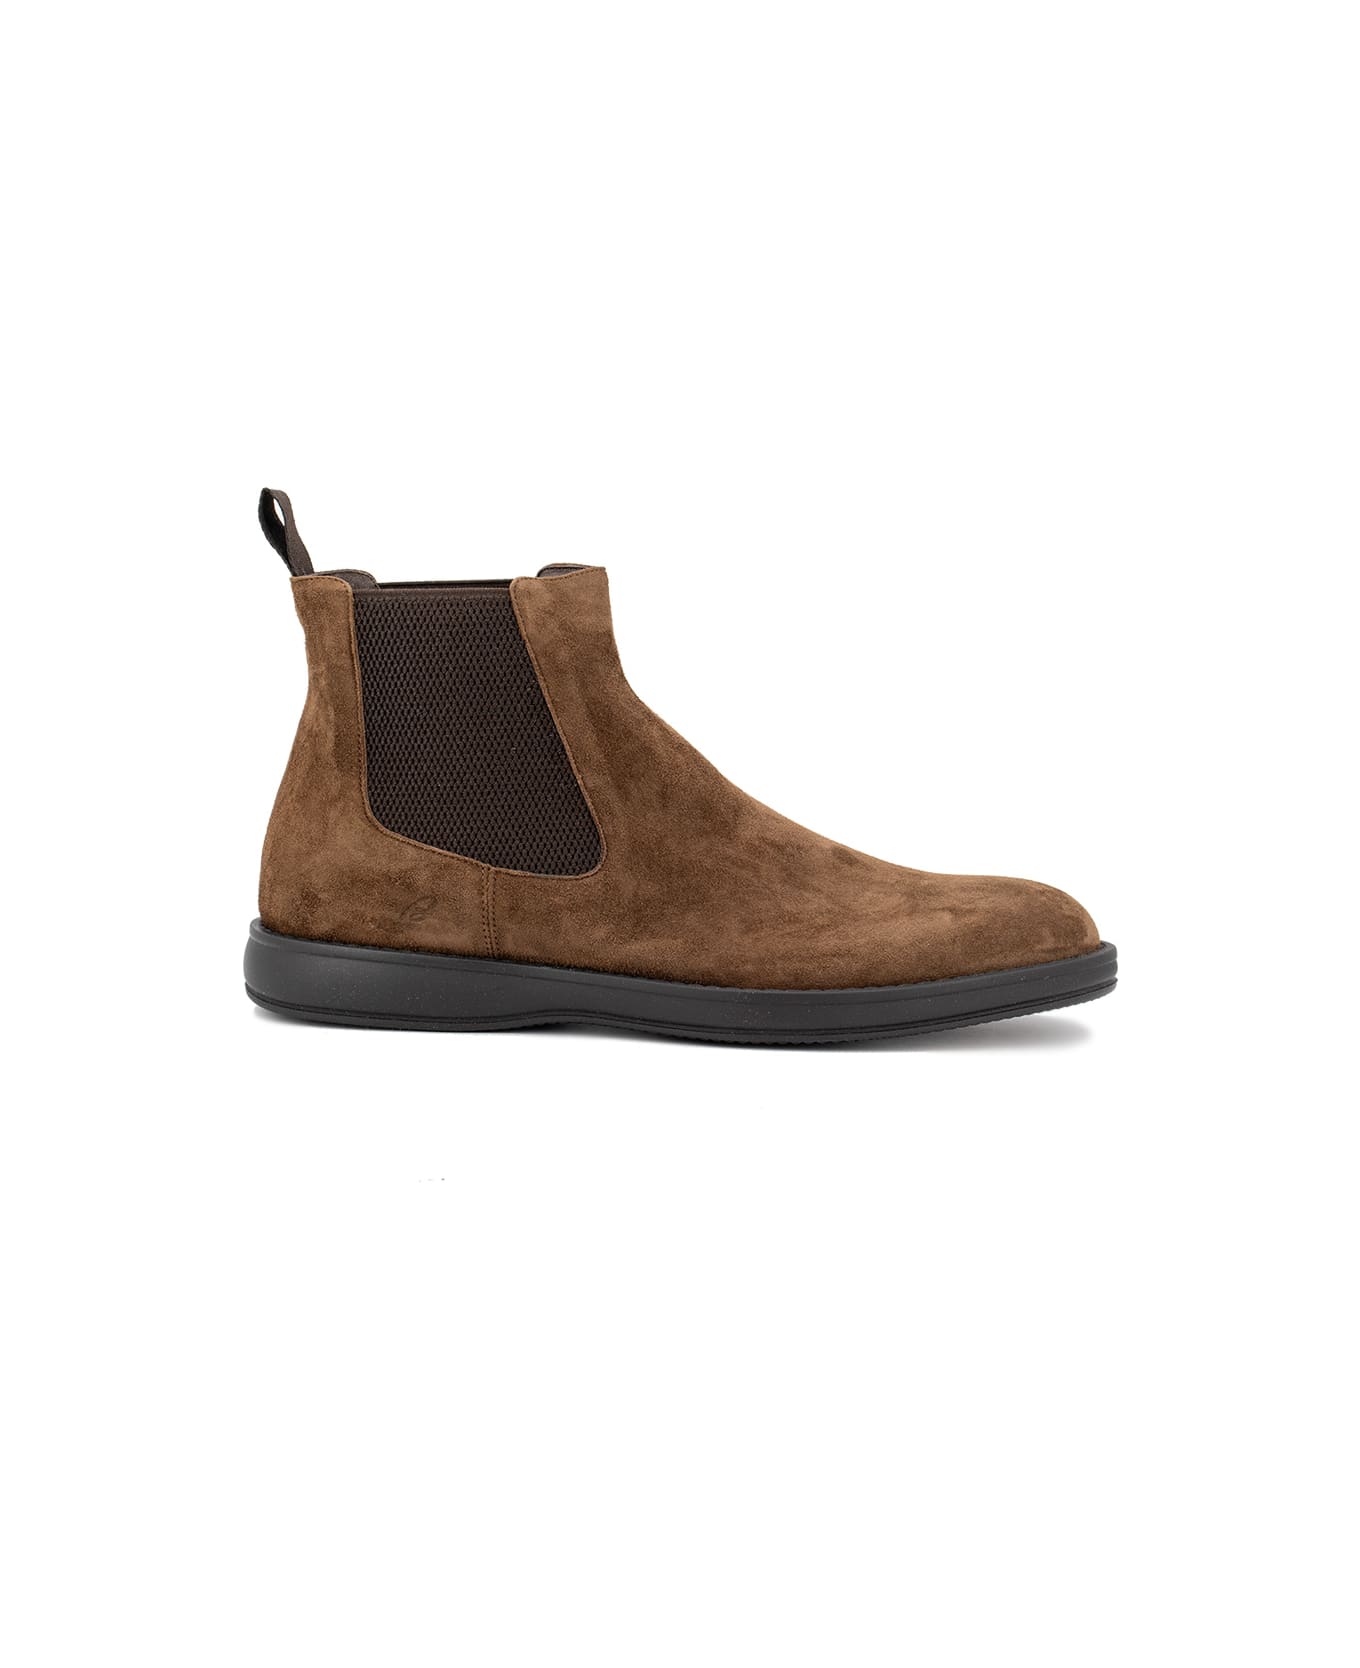 Brioni Ankle Boots - BROWN ブーツ